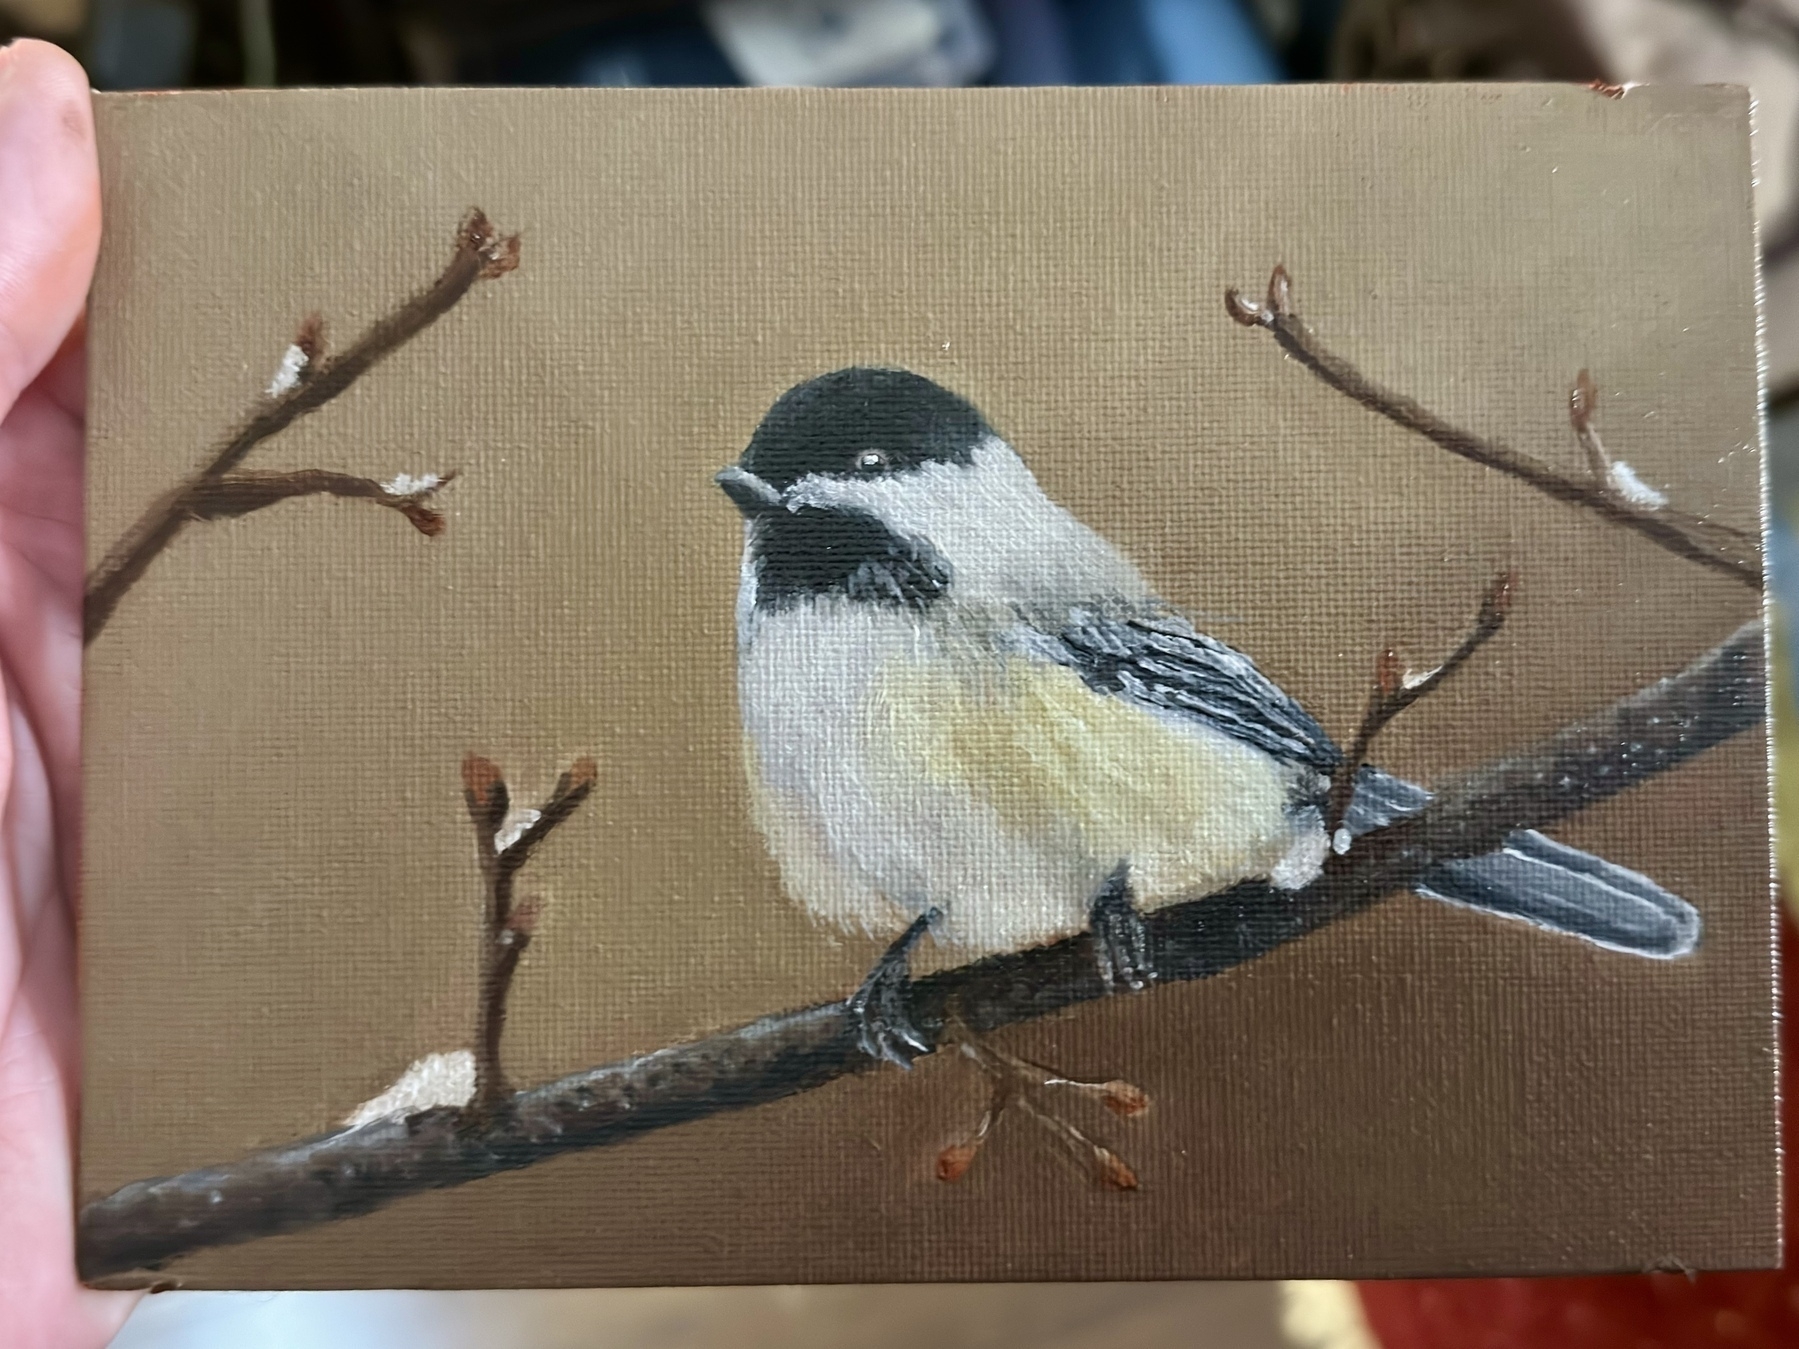 Oil painting of a small chickadee bird with black and white feathers, perched on a bare tree branch against a brown background.